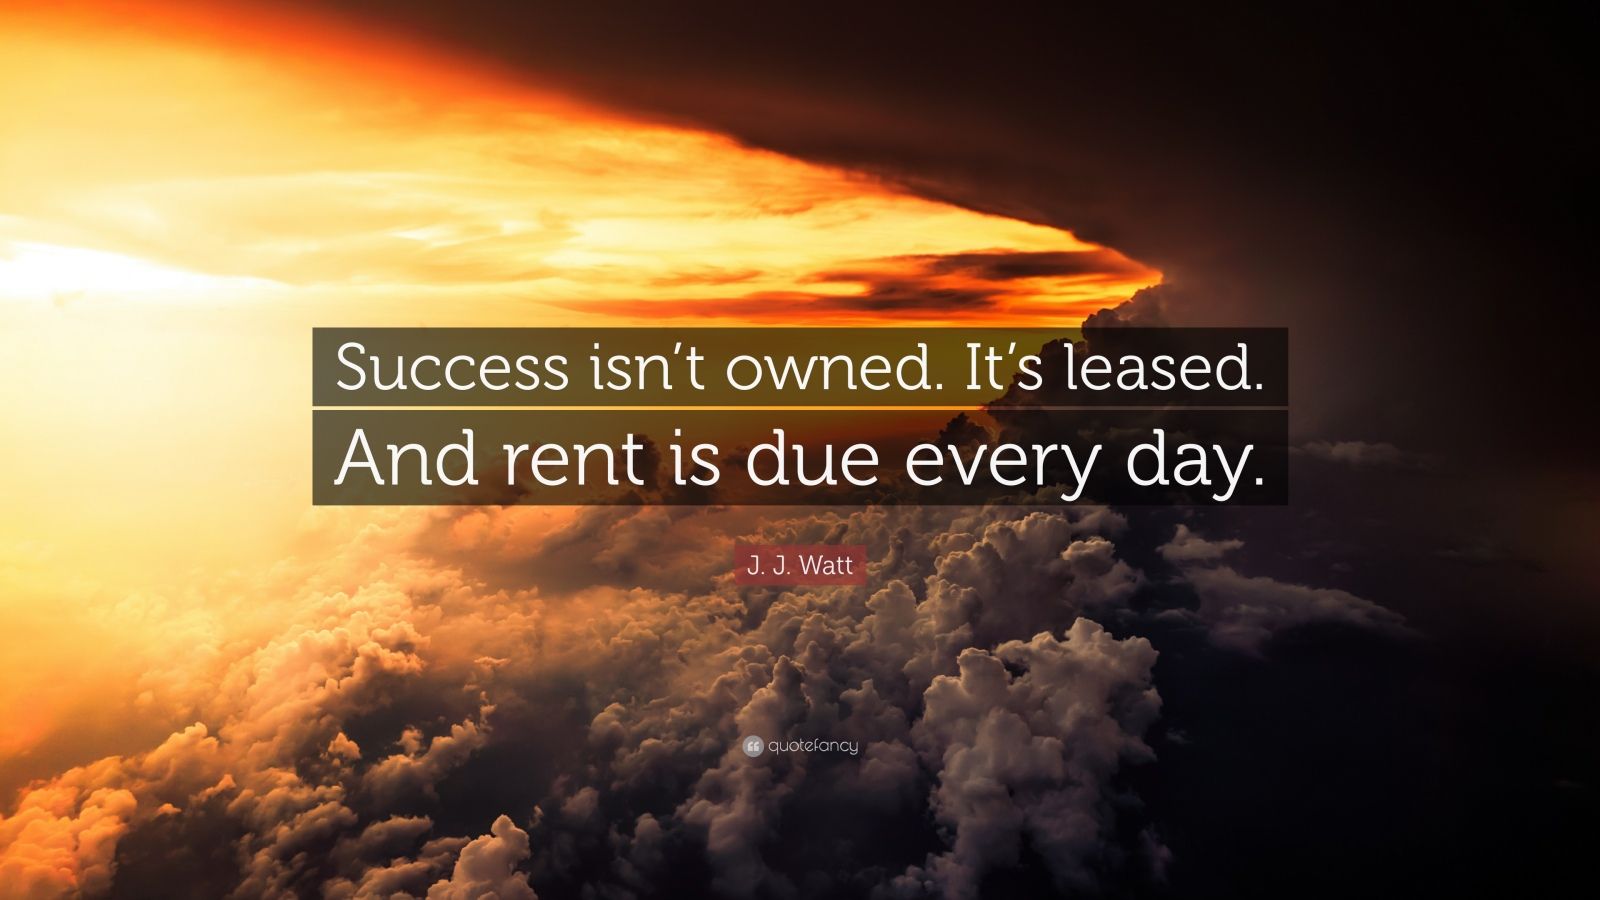 J. J. Watt Quote: “Success isn’t owned. It’s leased. And rent is due ...